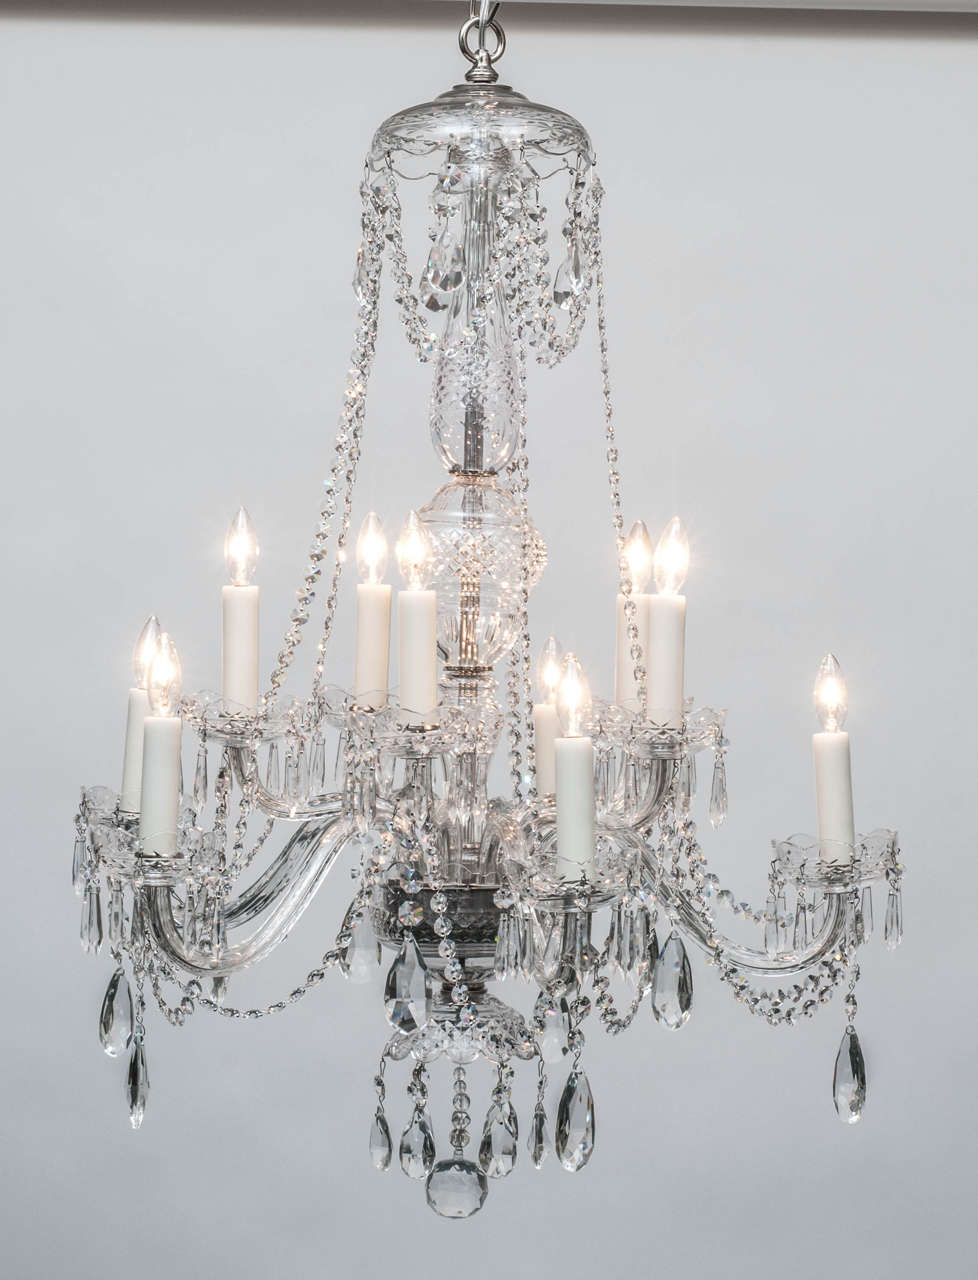 All hand-cut crystal. Ceiling cap, chain and hanging hardware included.